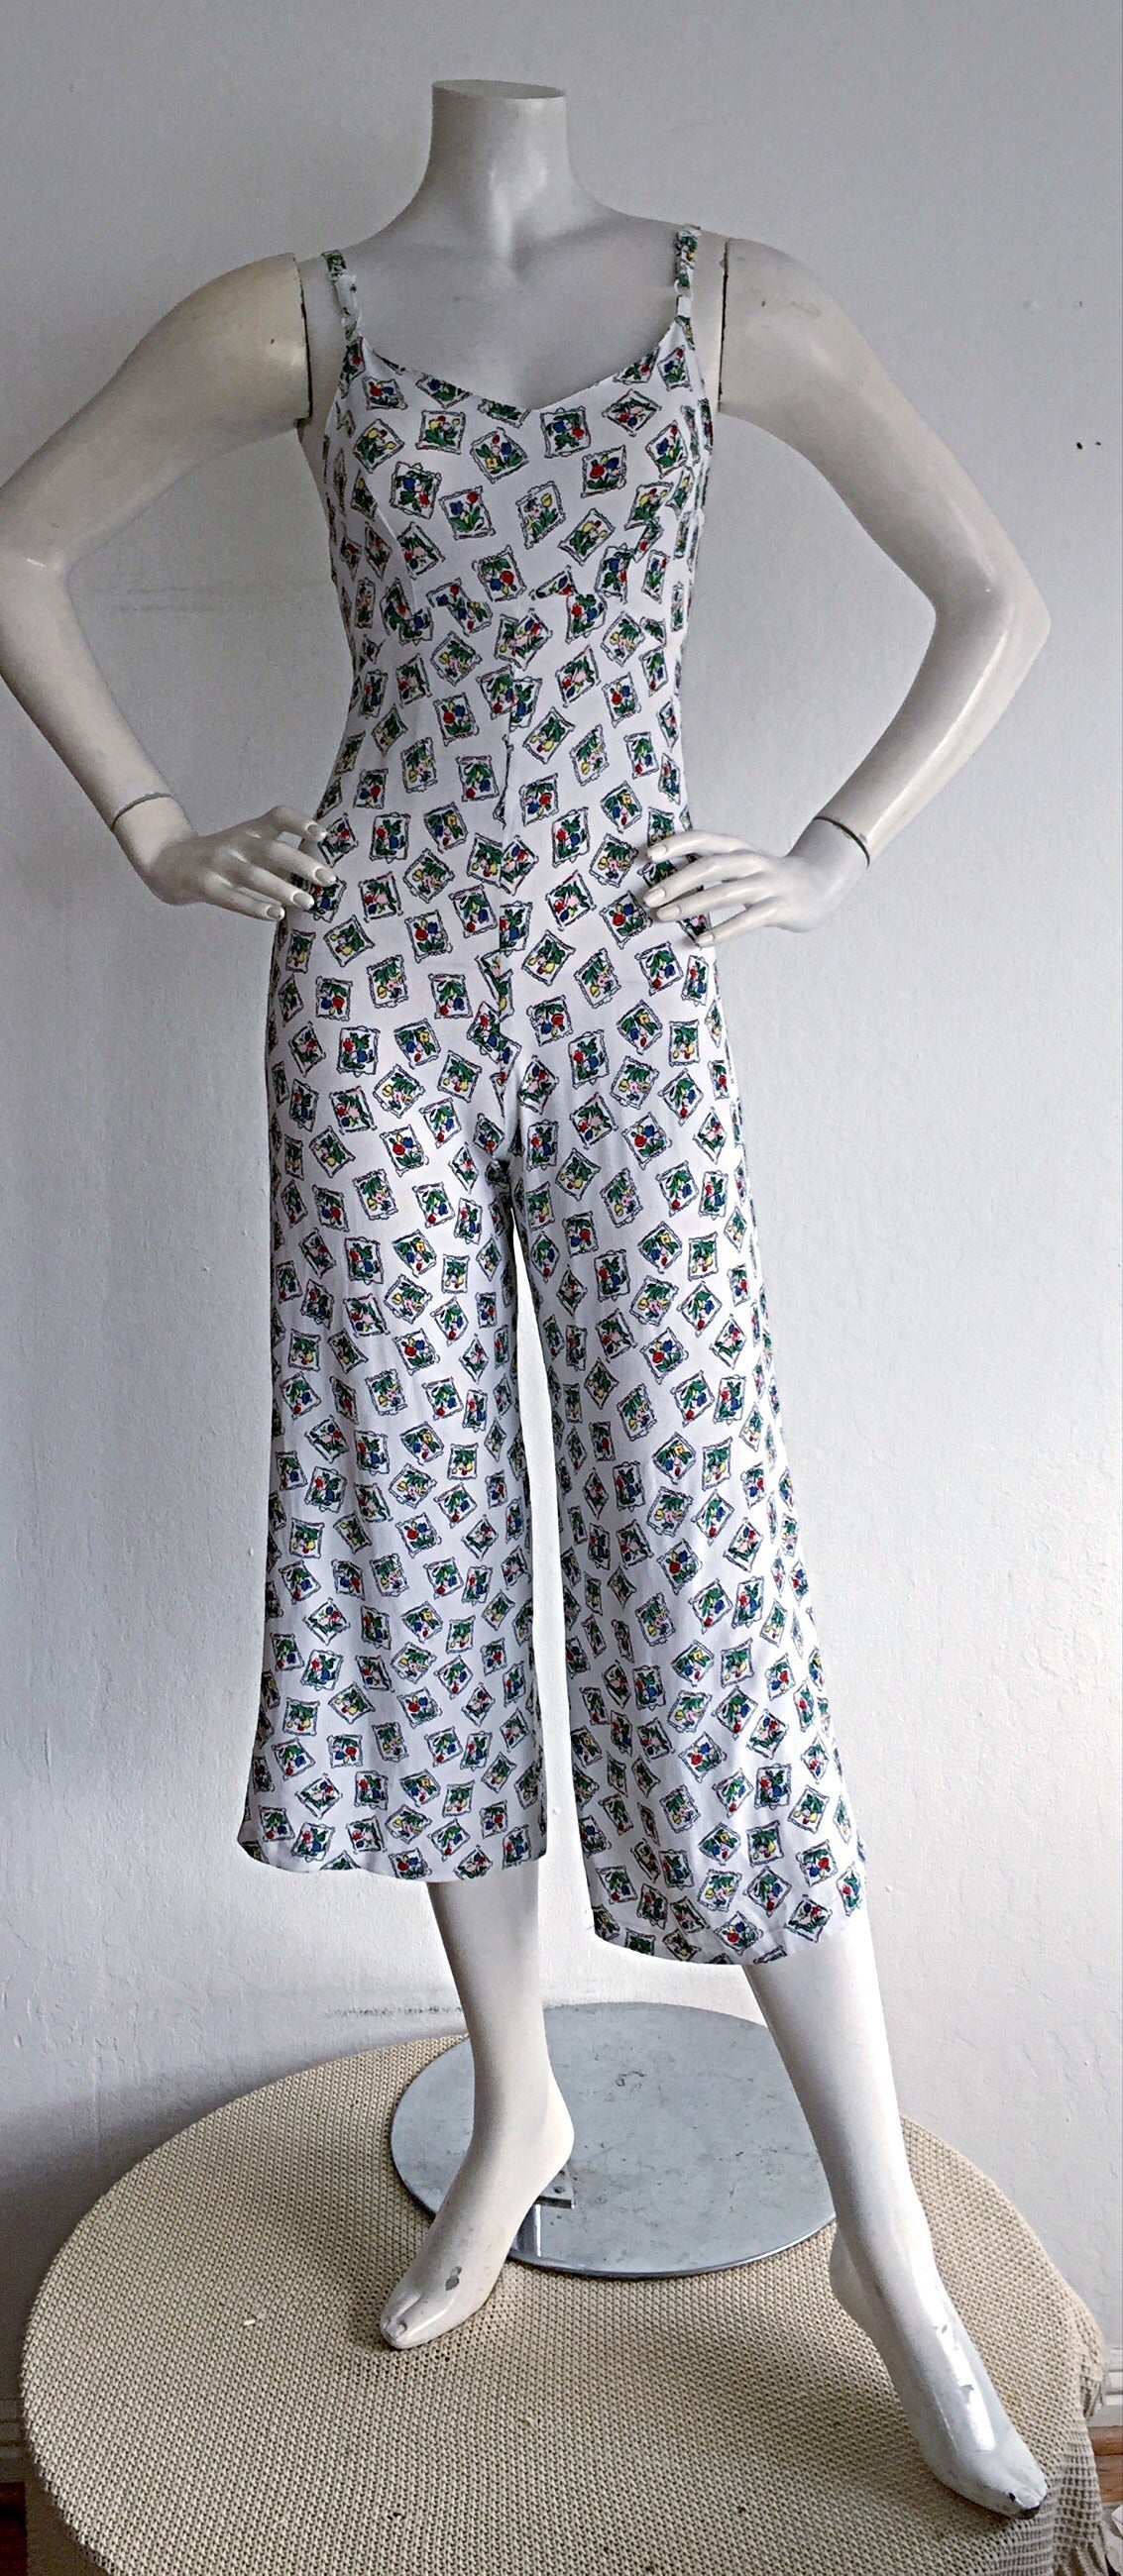 Adorable vintage 1990s Betsey Johnson white silk culottes Jumpsuit/Playsuit! Wonderful floral print throughout. Adjustable strap length, with hidden zipper up the back. Ultra flattering fit, with a flared leg. Can easily be dressed up or down. Looks